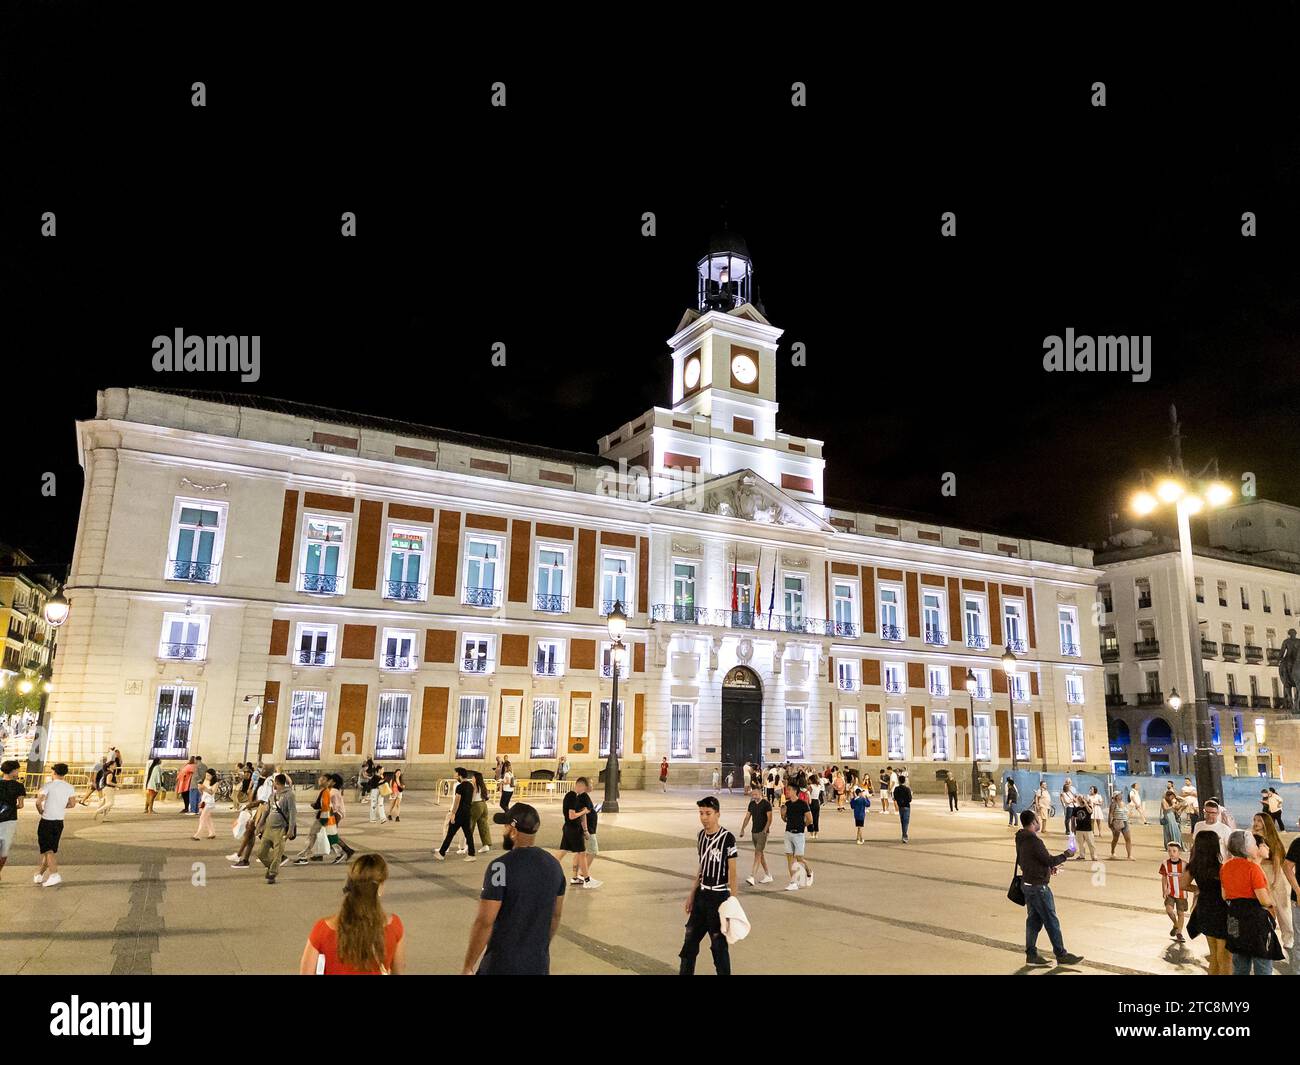 Madrid, Spain - August 29, 2023: The historic Real Casa de Correos or Royal House of the Post Office in Puerta del Sol in Madrid at night. Stock Photo